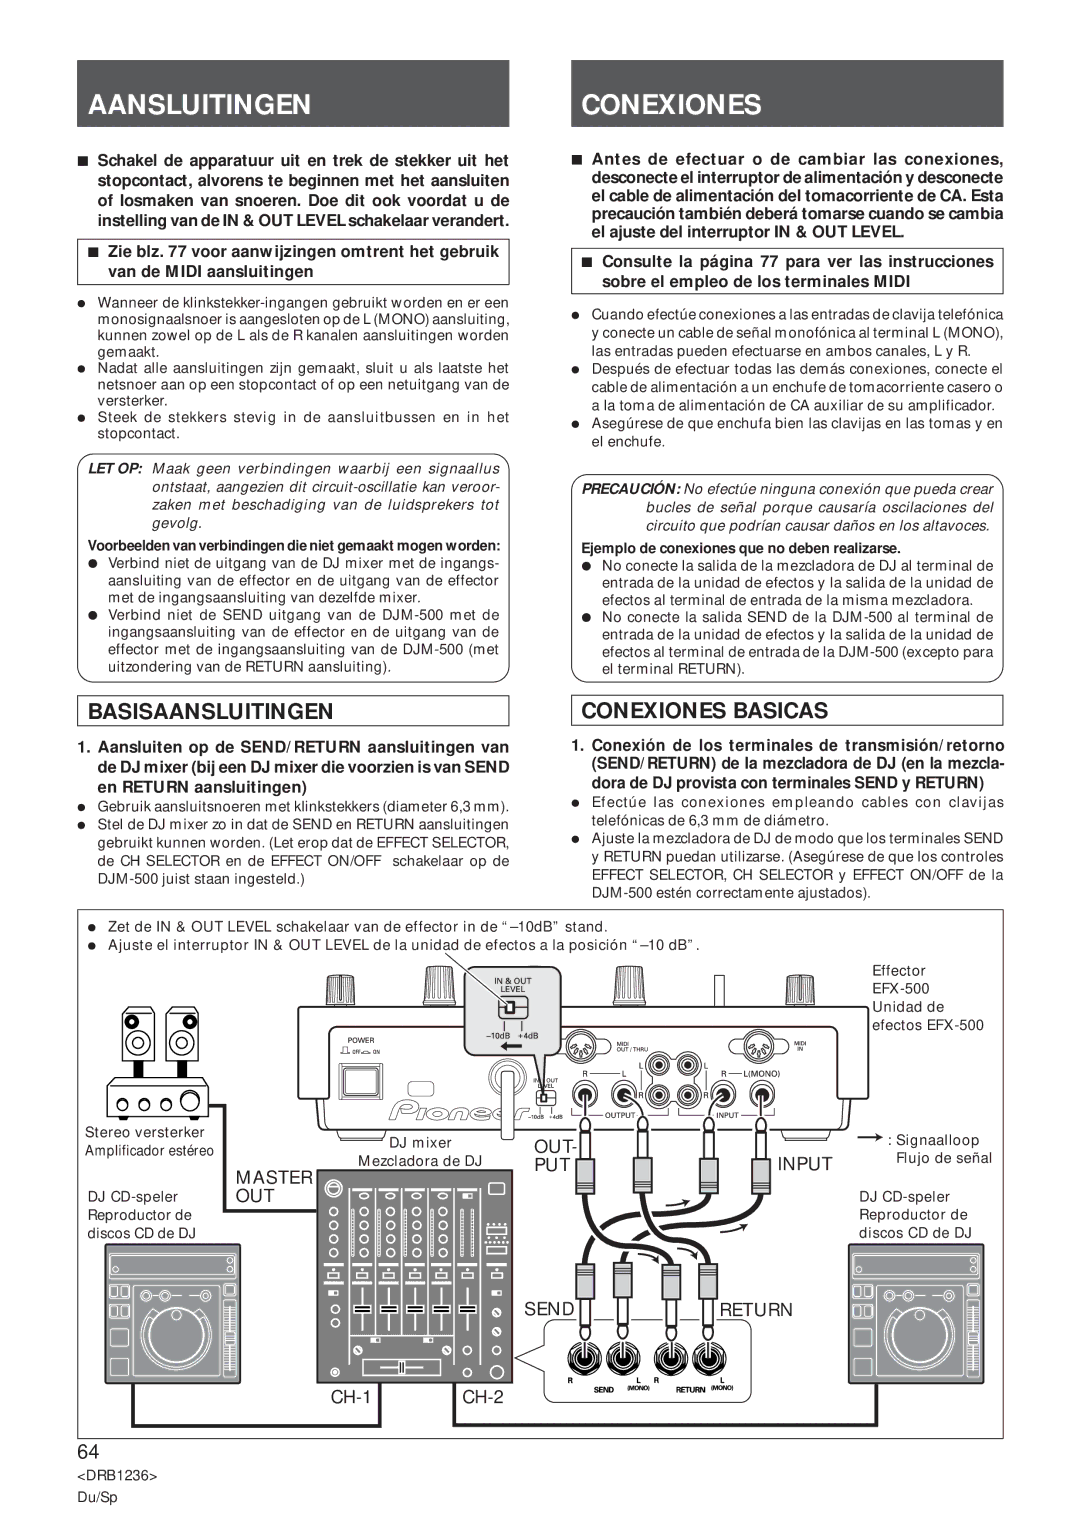 Pioneer Efx-500 operating instructions Aansluitingenconexiones, Basisaansluitingen, Conexiones Basicas 